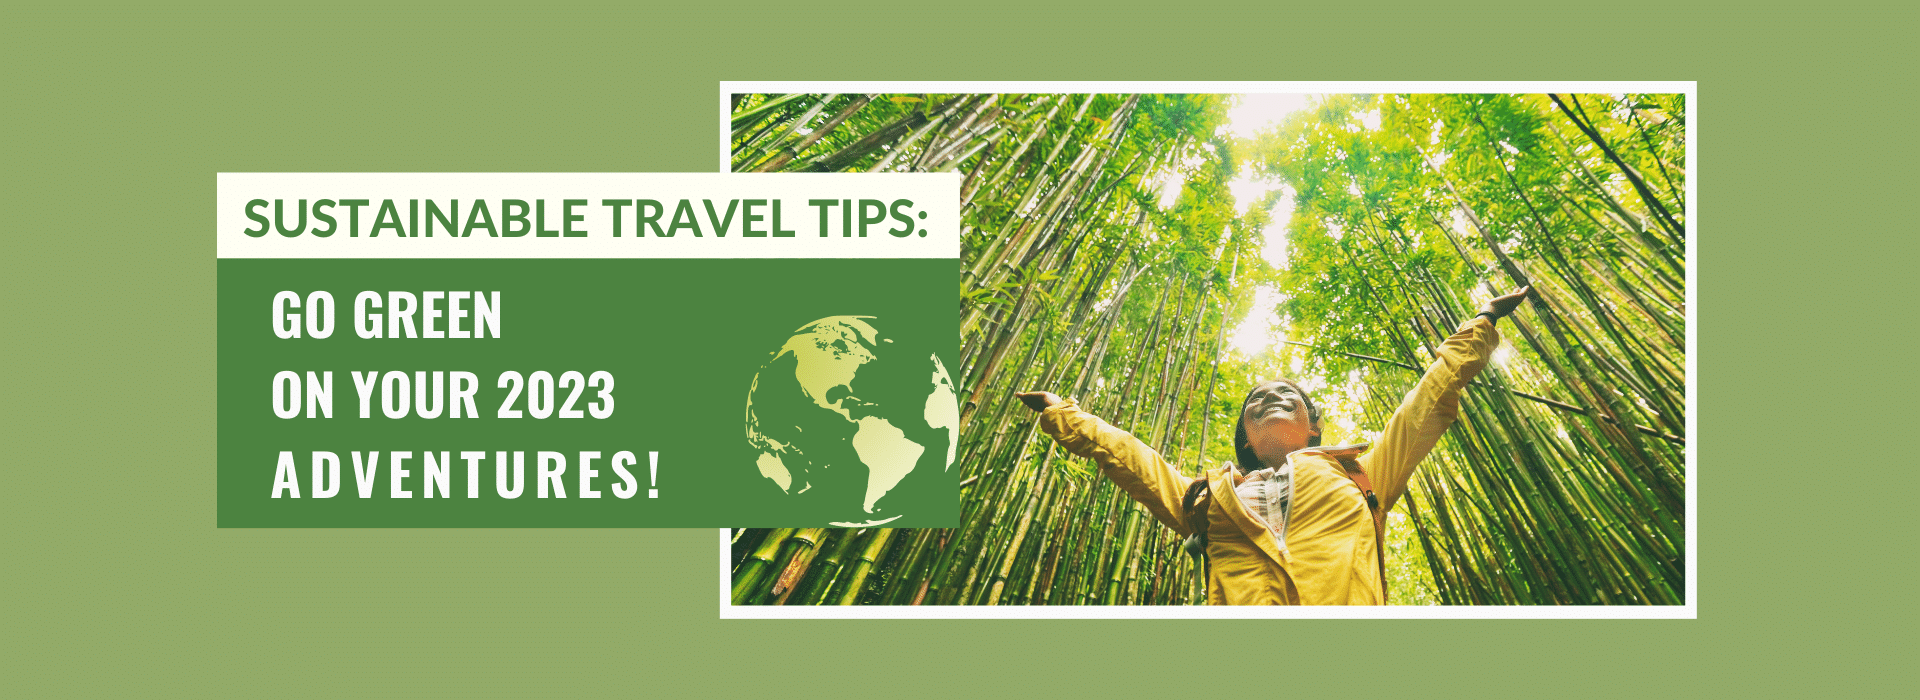 Sustainable Travel Tips Header Image 